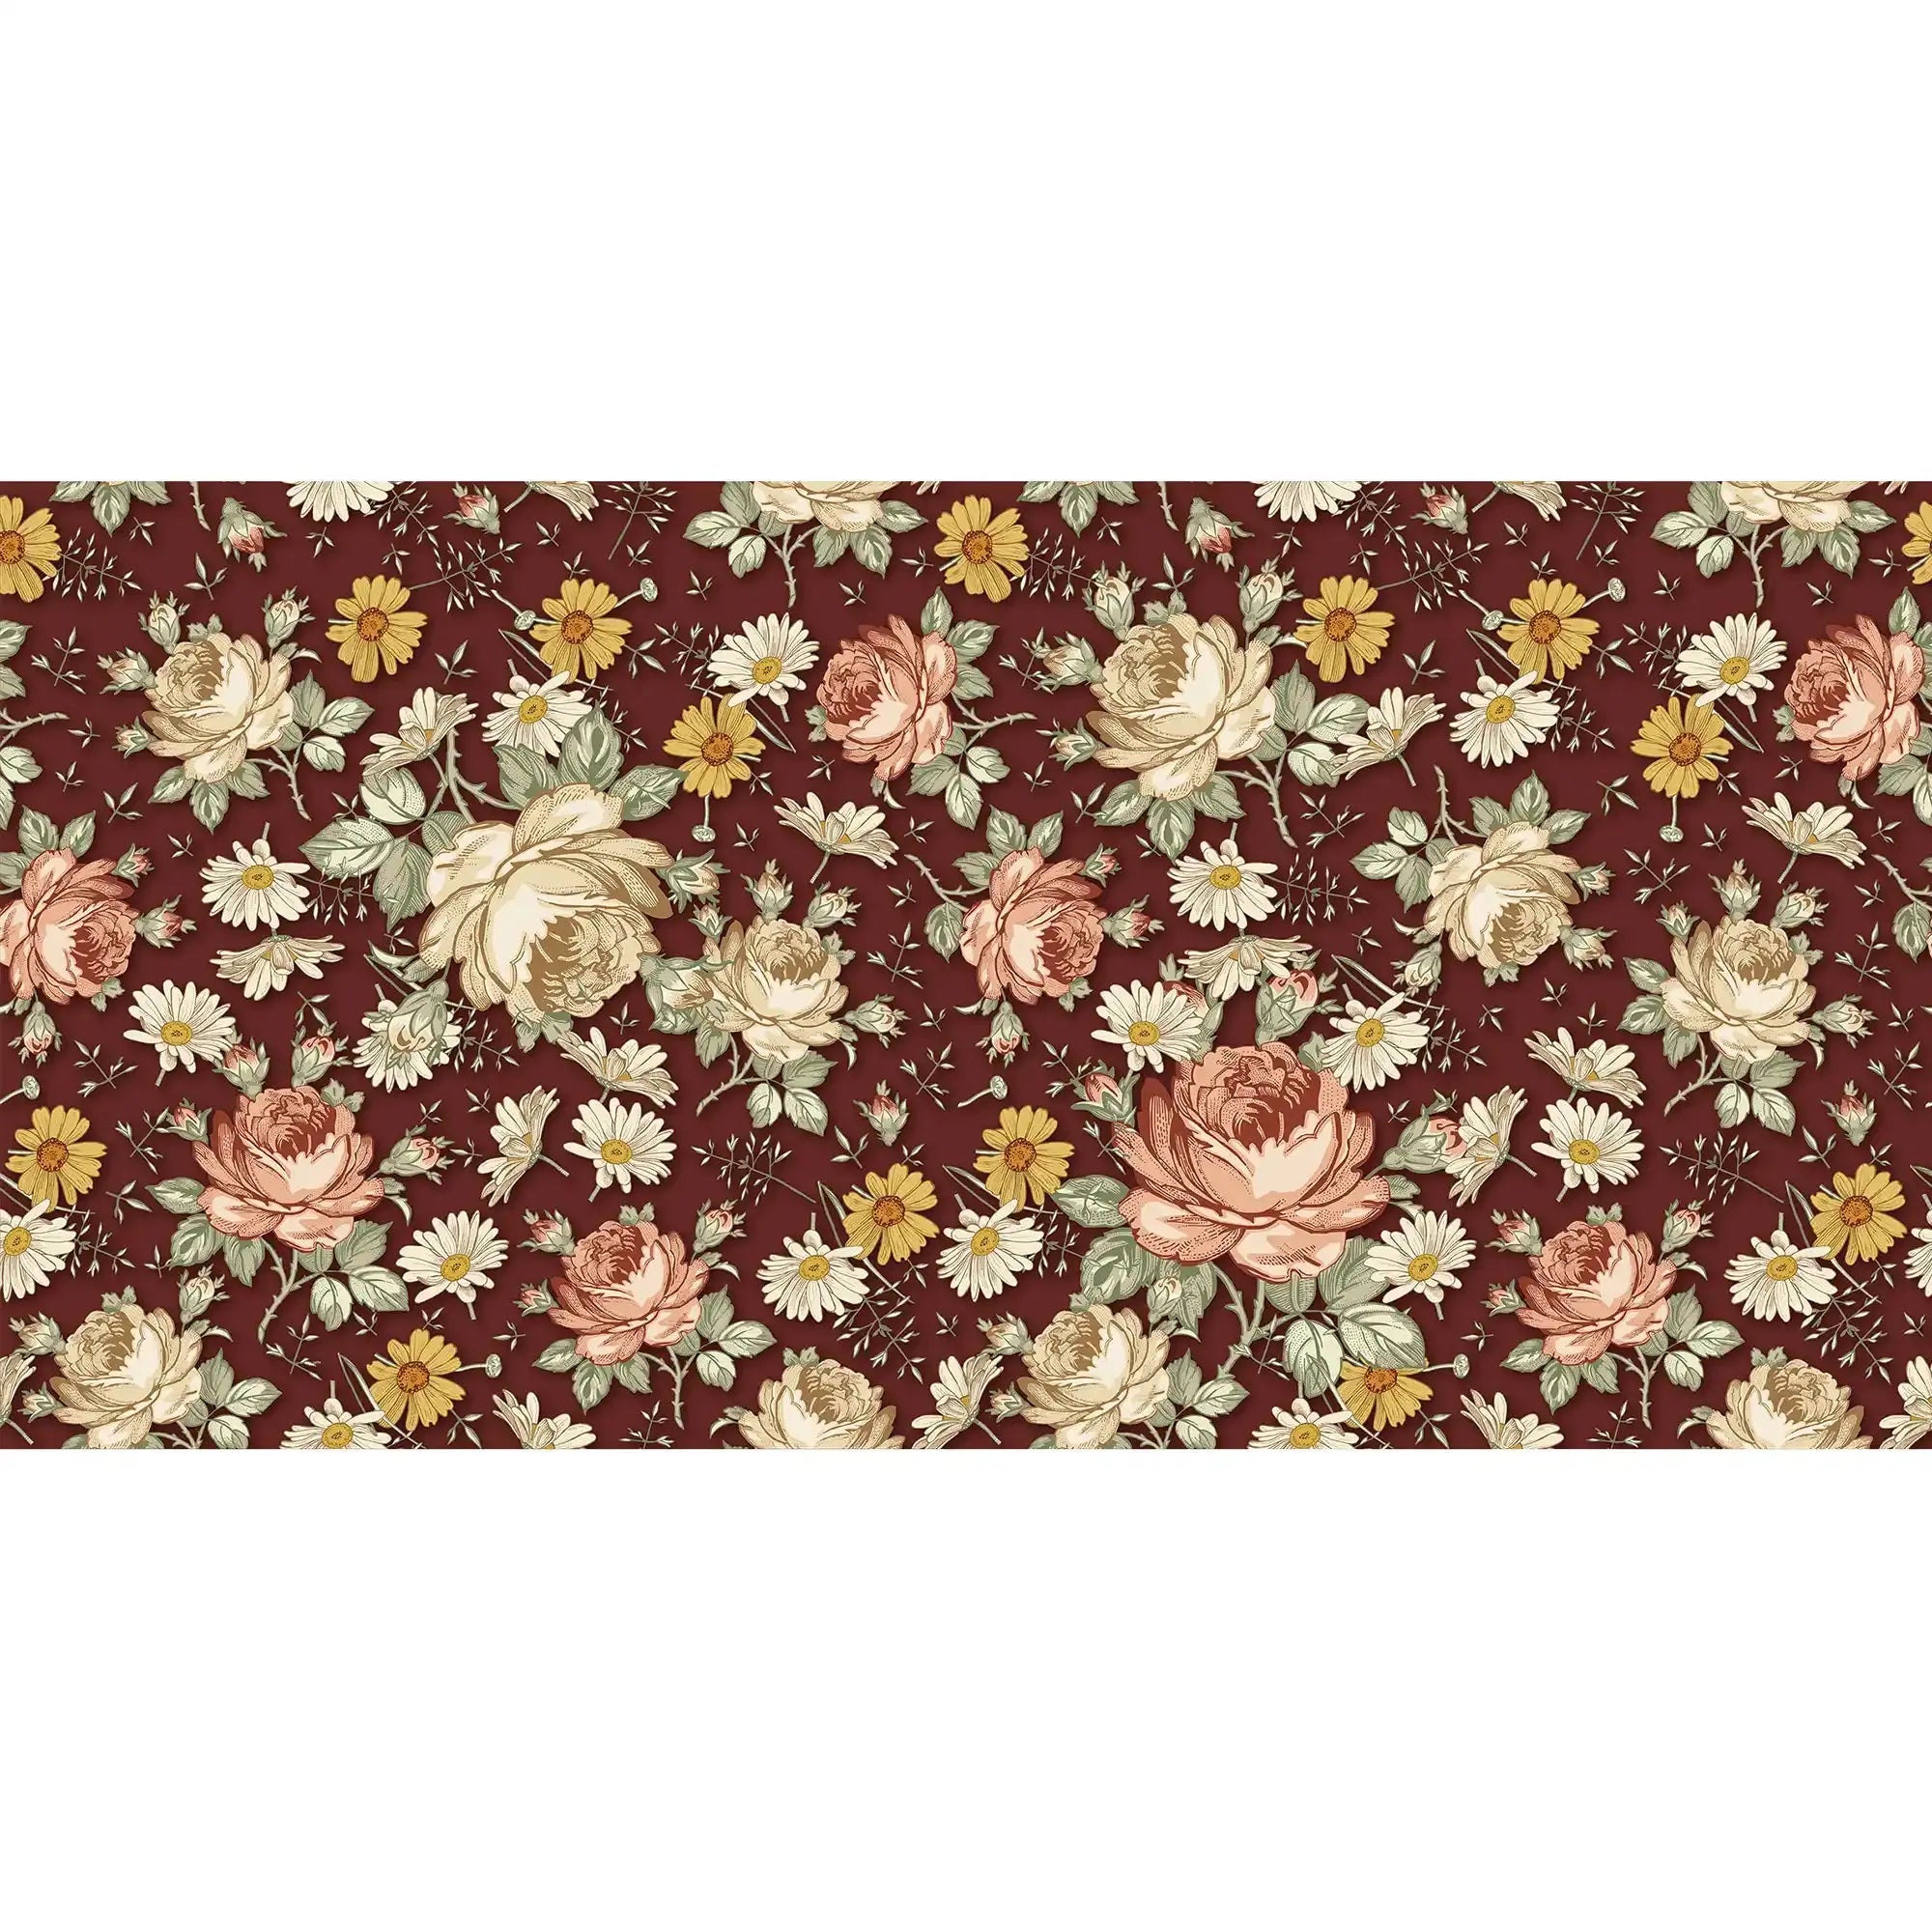 3097-B / Removable Wallpaper Peel and Stick, Floral & Geometric Pattern Wallpaper with Daisies for Room Decor - Artevella